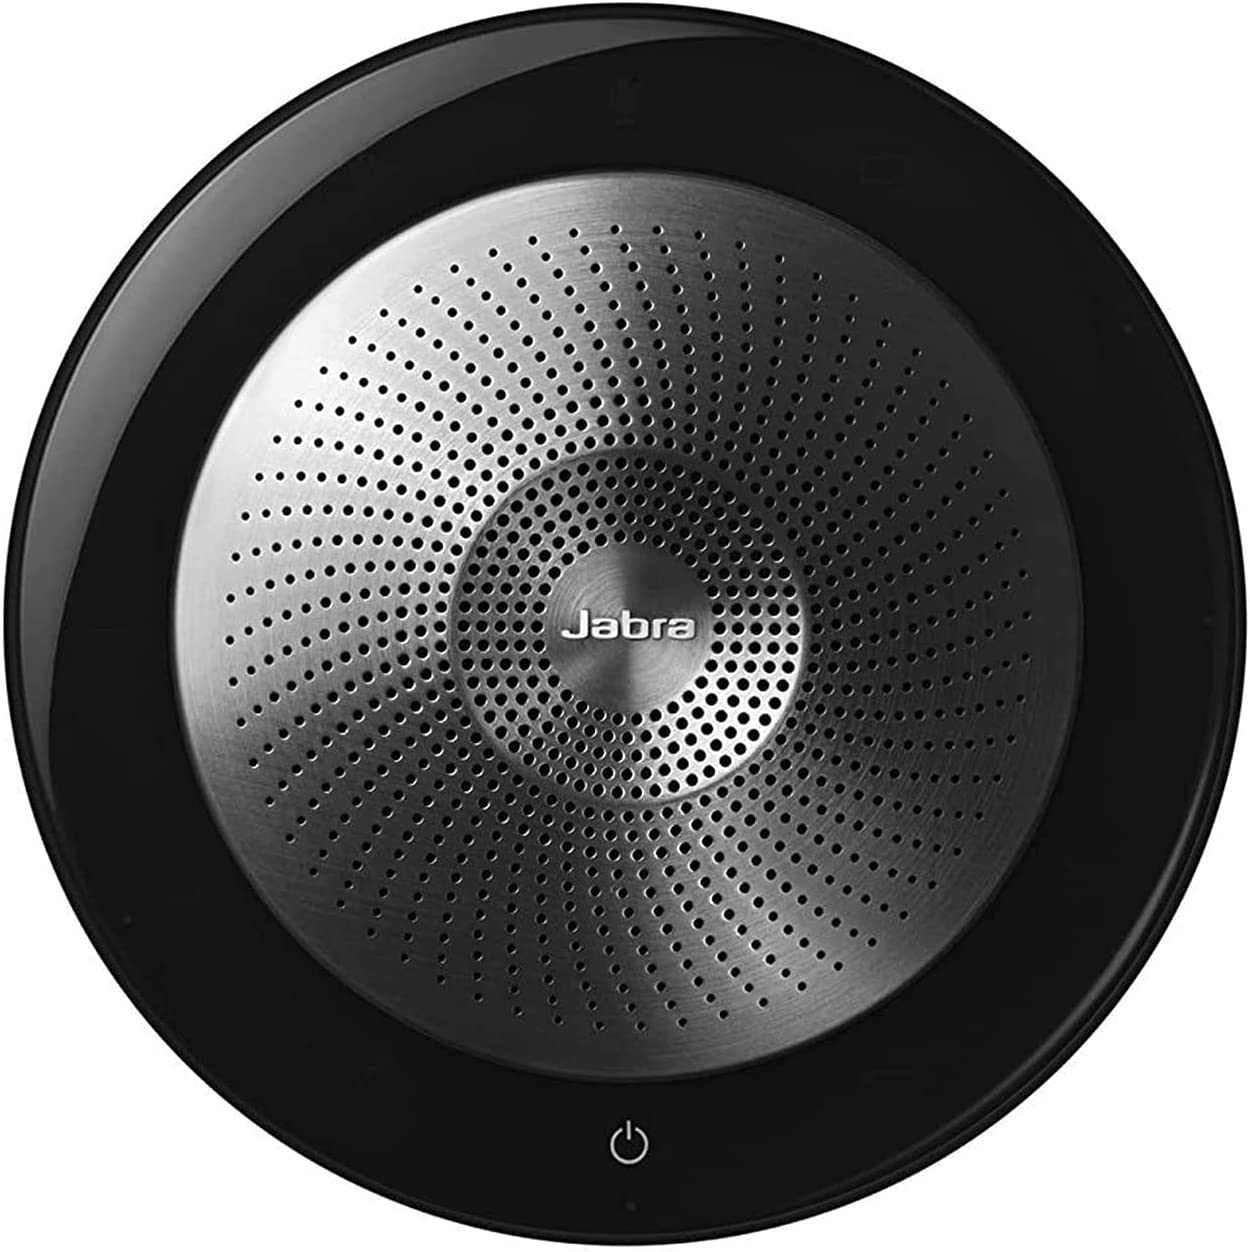 Jabra Speak 710 Wireless Portable Bluetooth Speaker - Holds Meetings Anywhere with Outstanding Sound Quality - UC-Optimized (New)